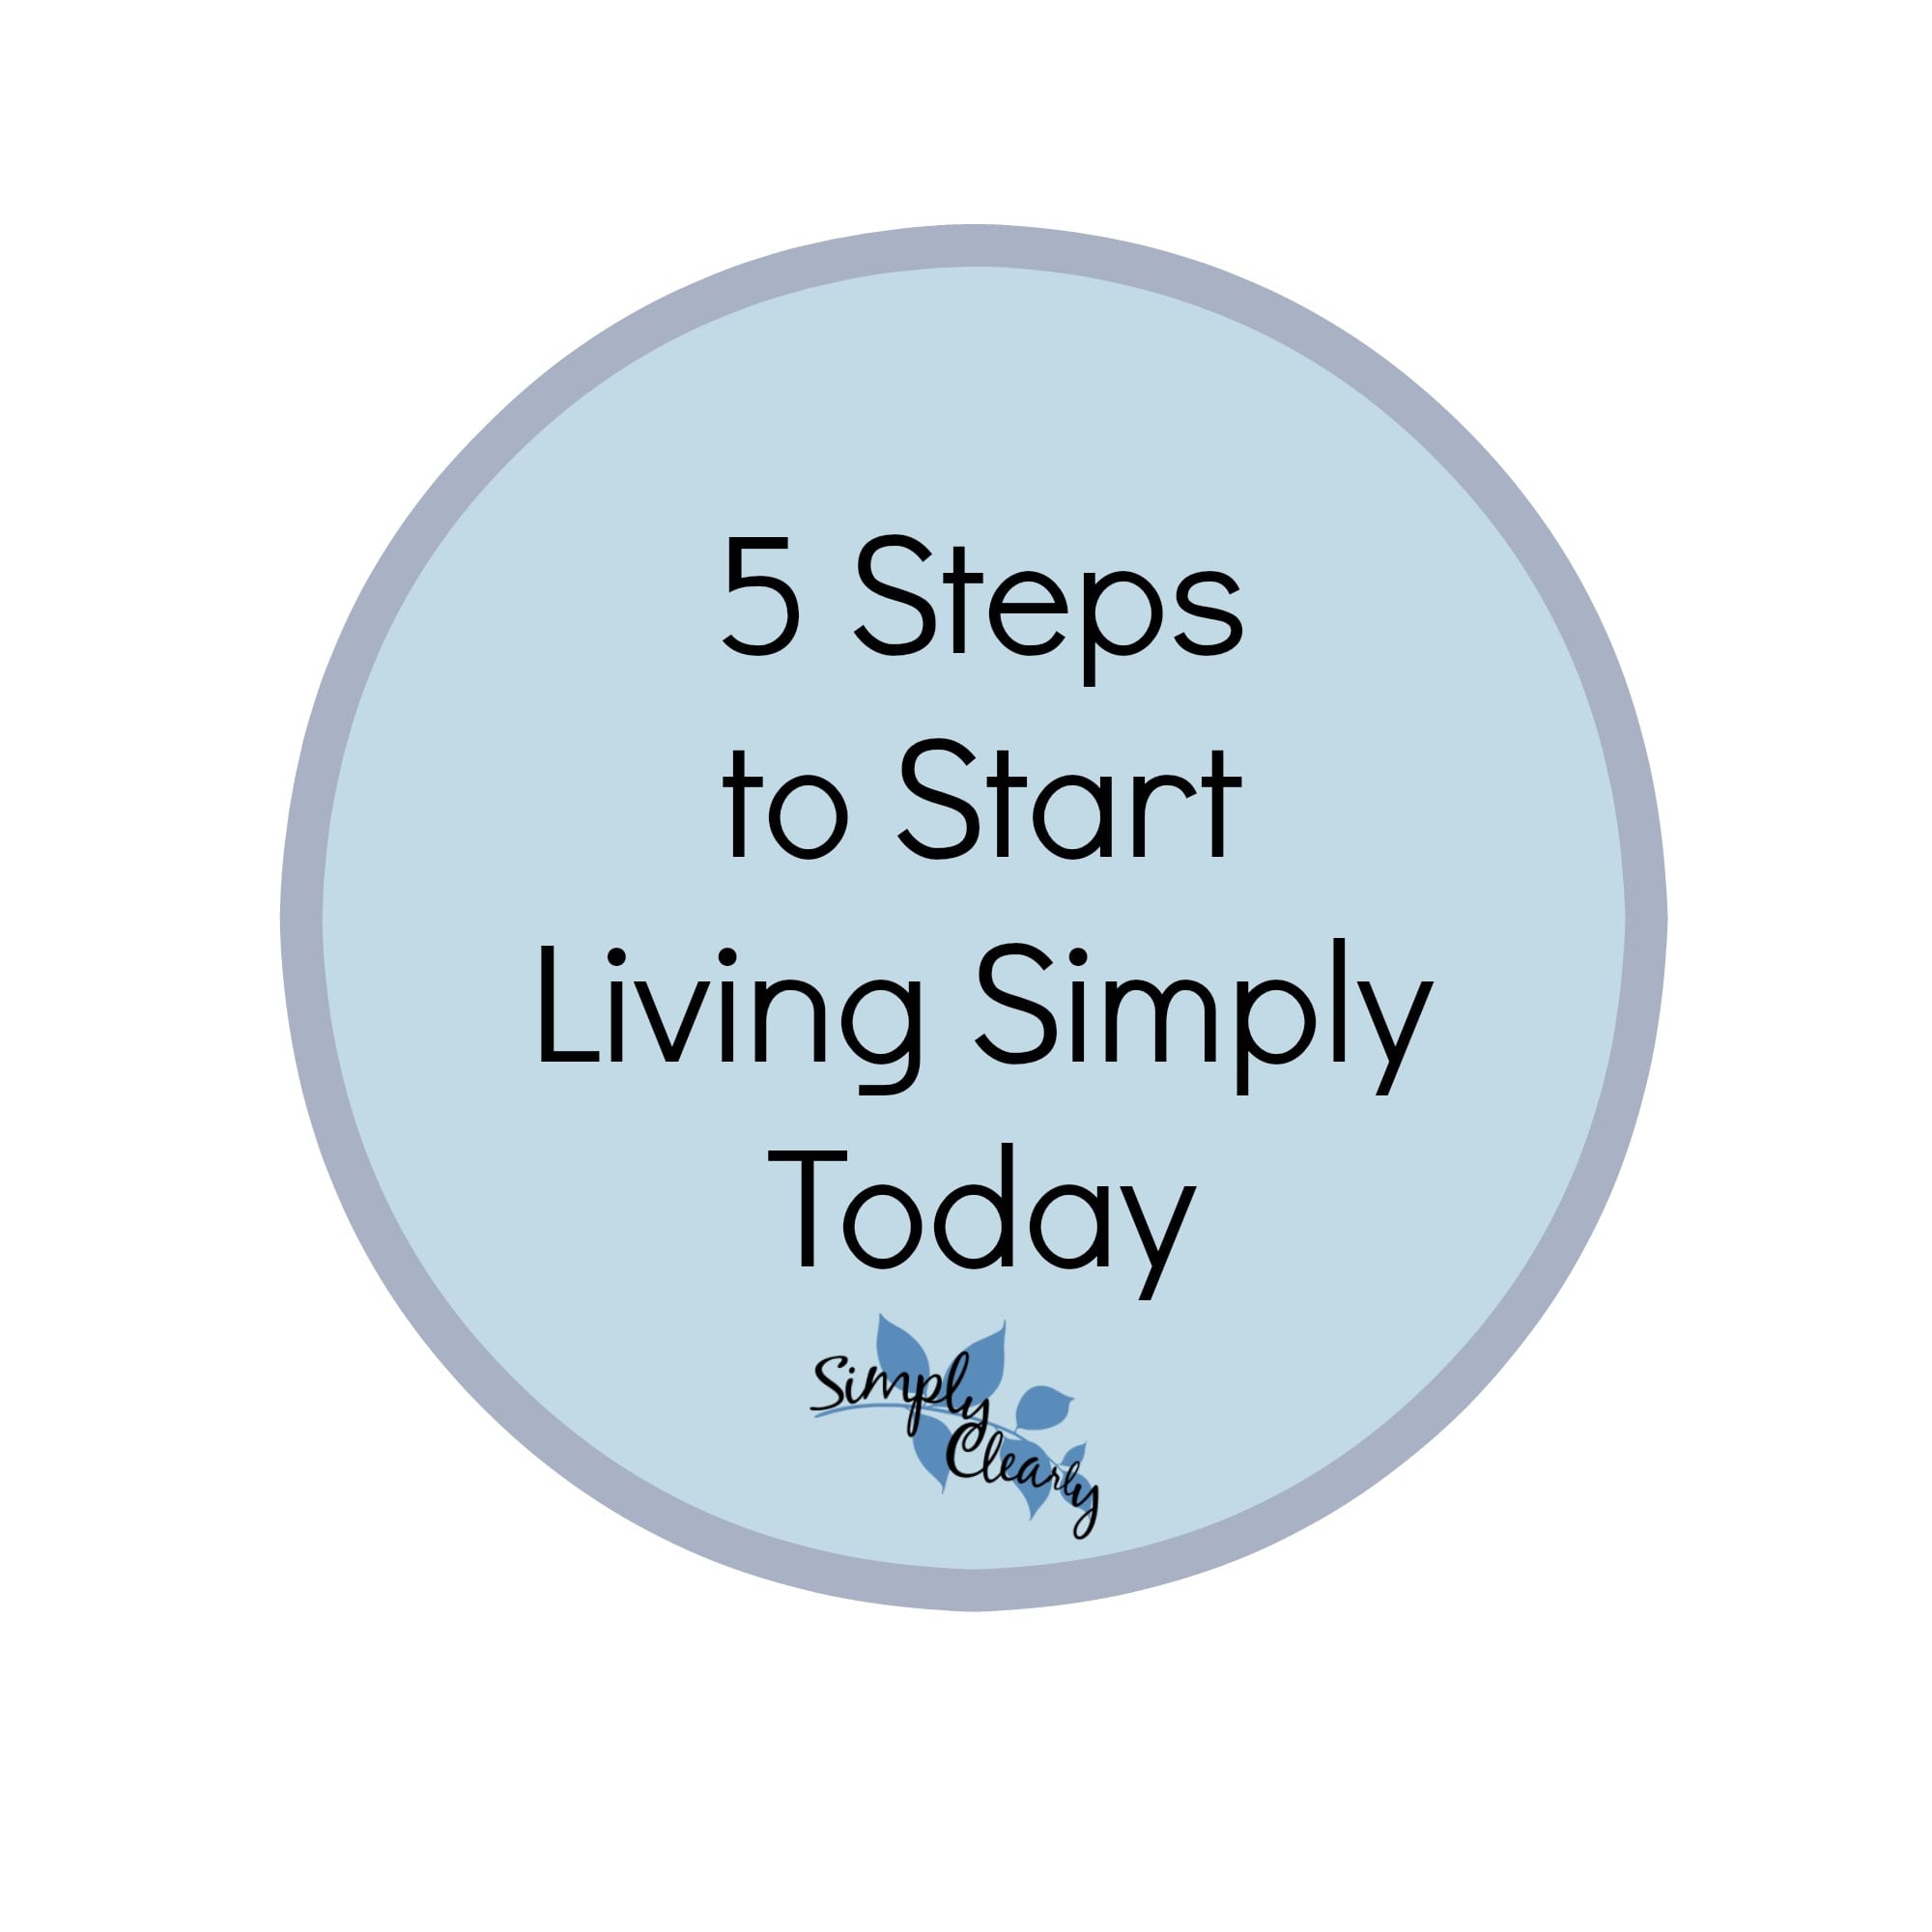 5 Steps to Start Living Simply Today